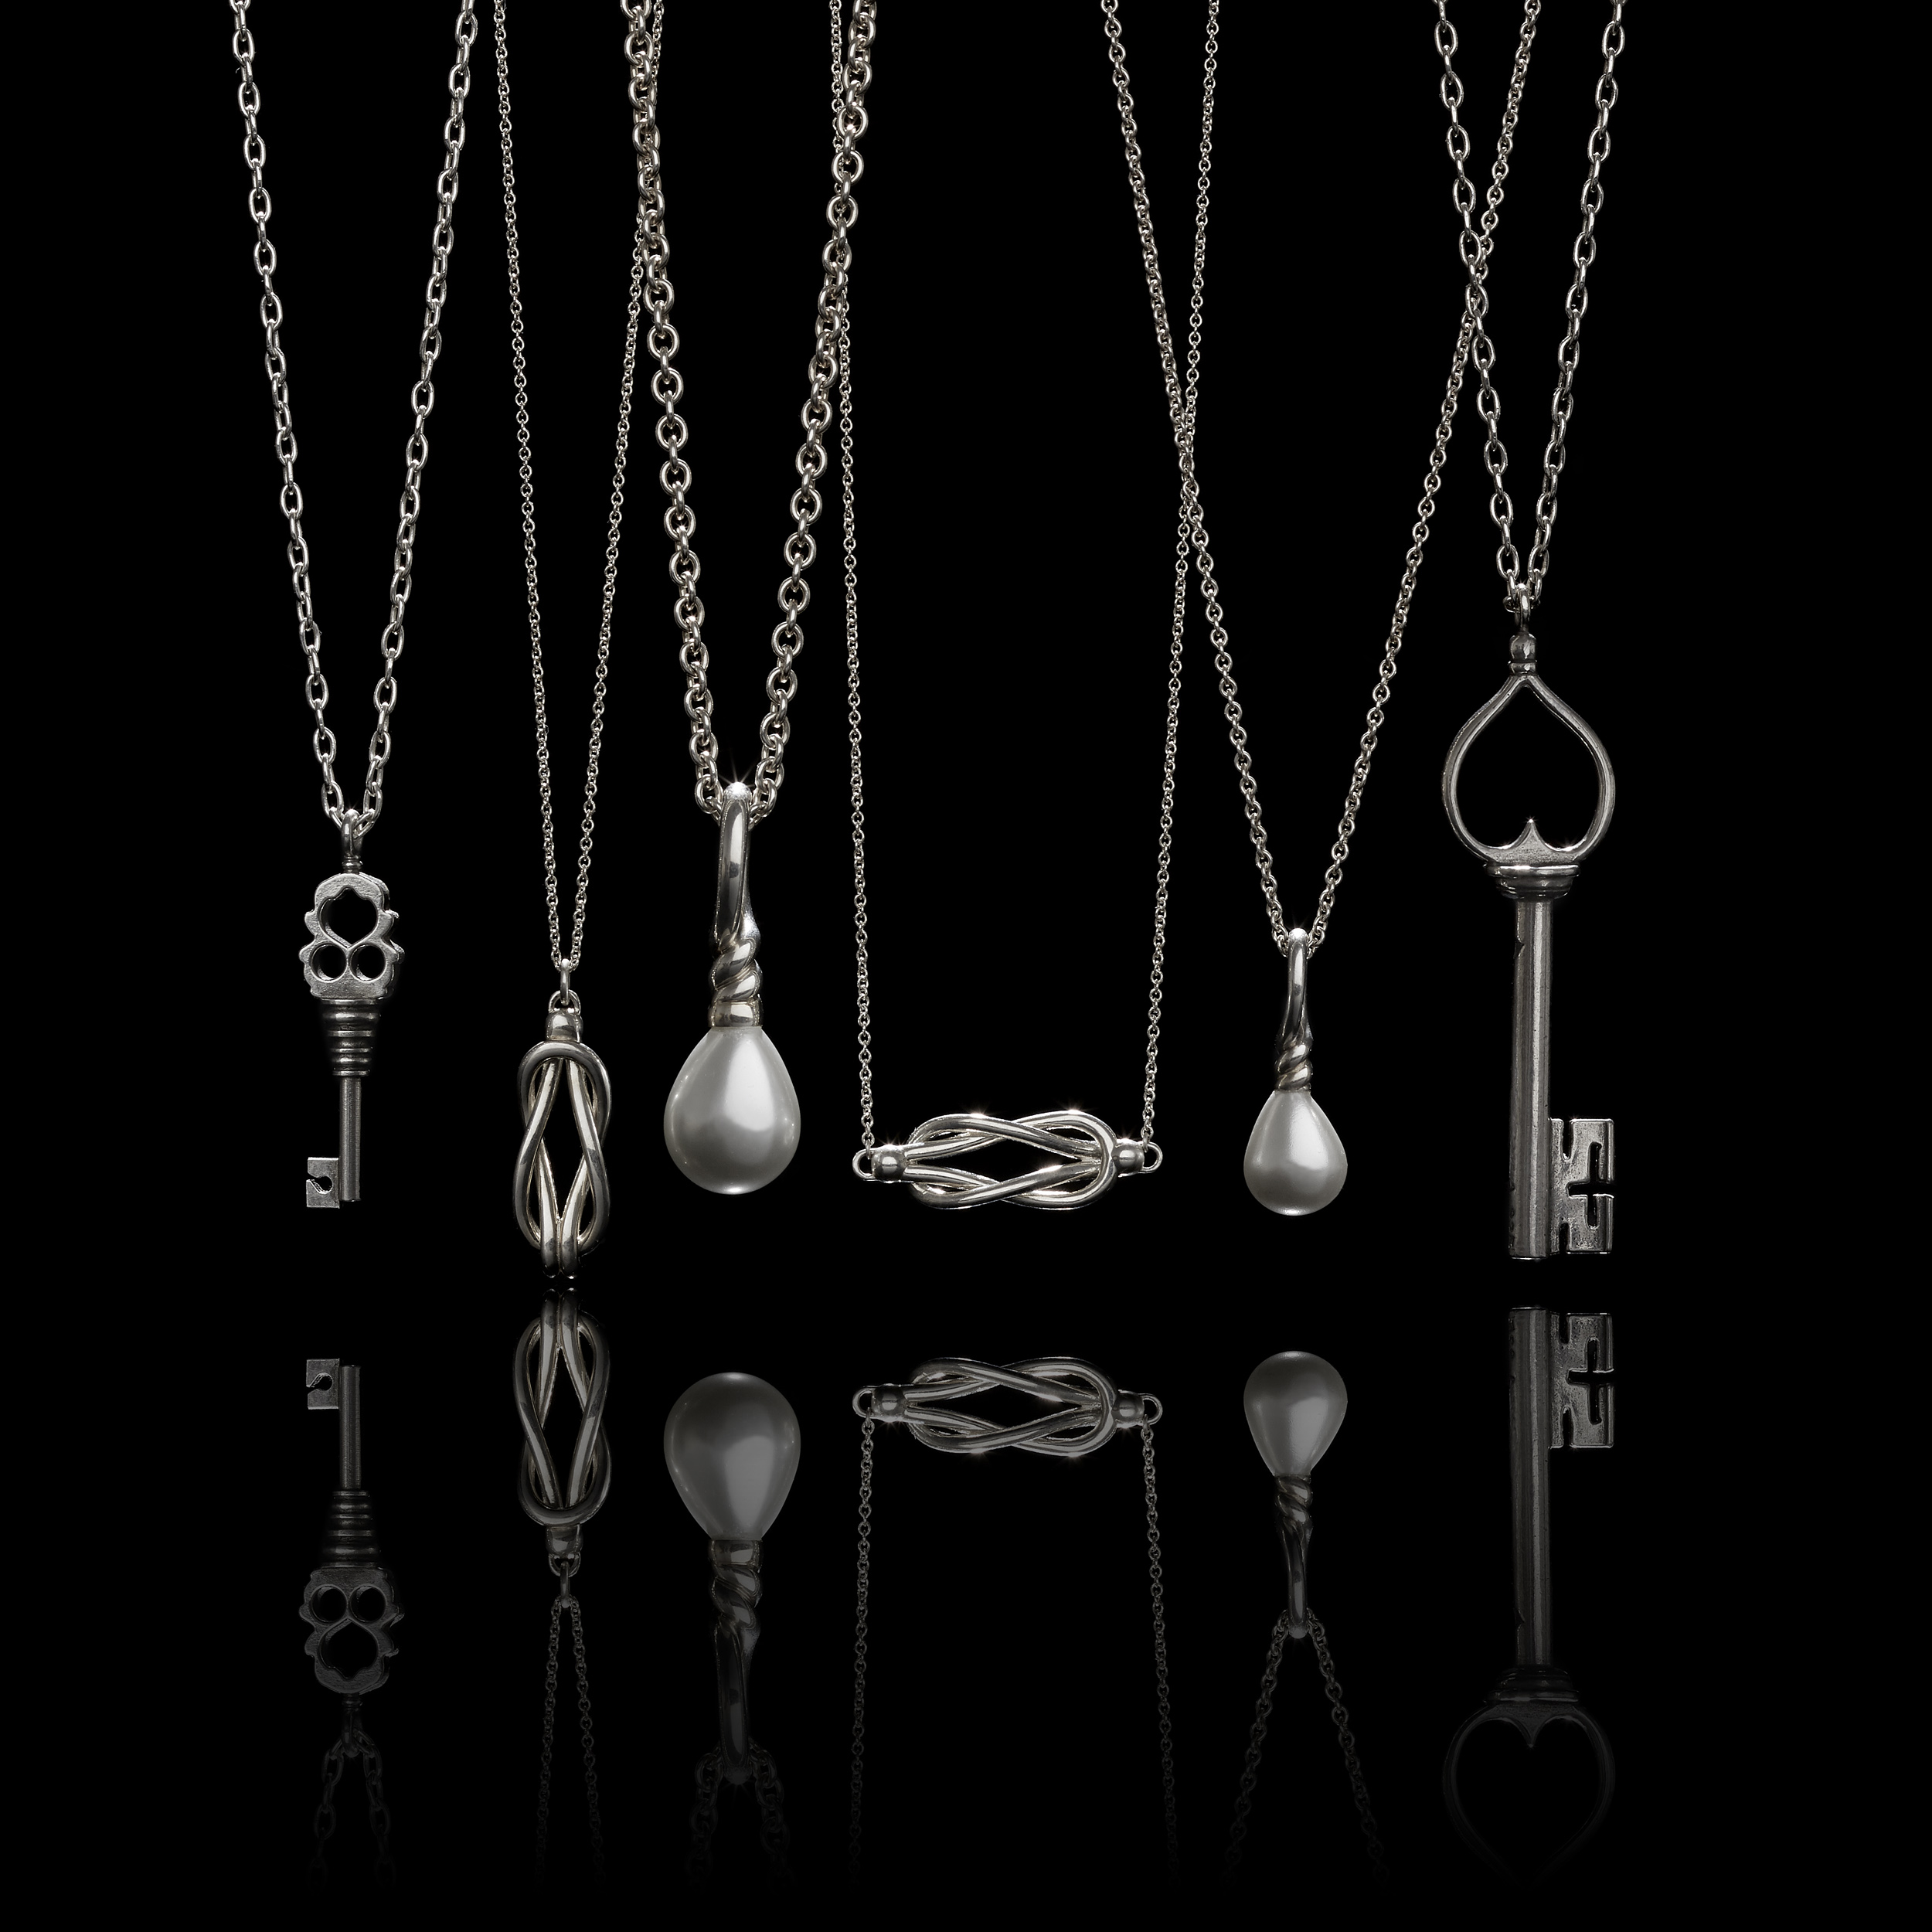 A group of silver pendant necklaces including keys, pearls, and knots with moody lighting, a reflection, and a black background